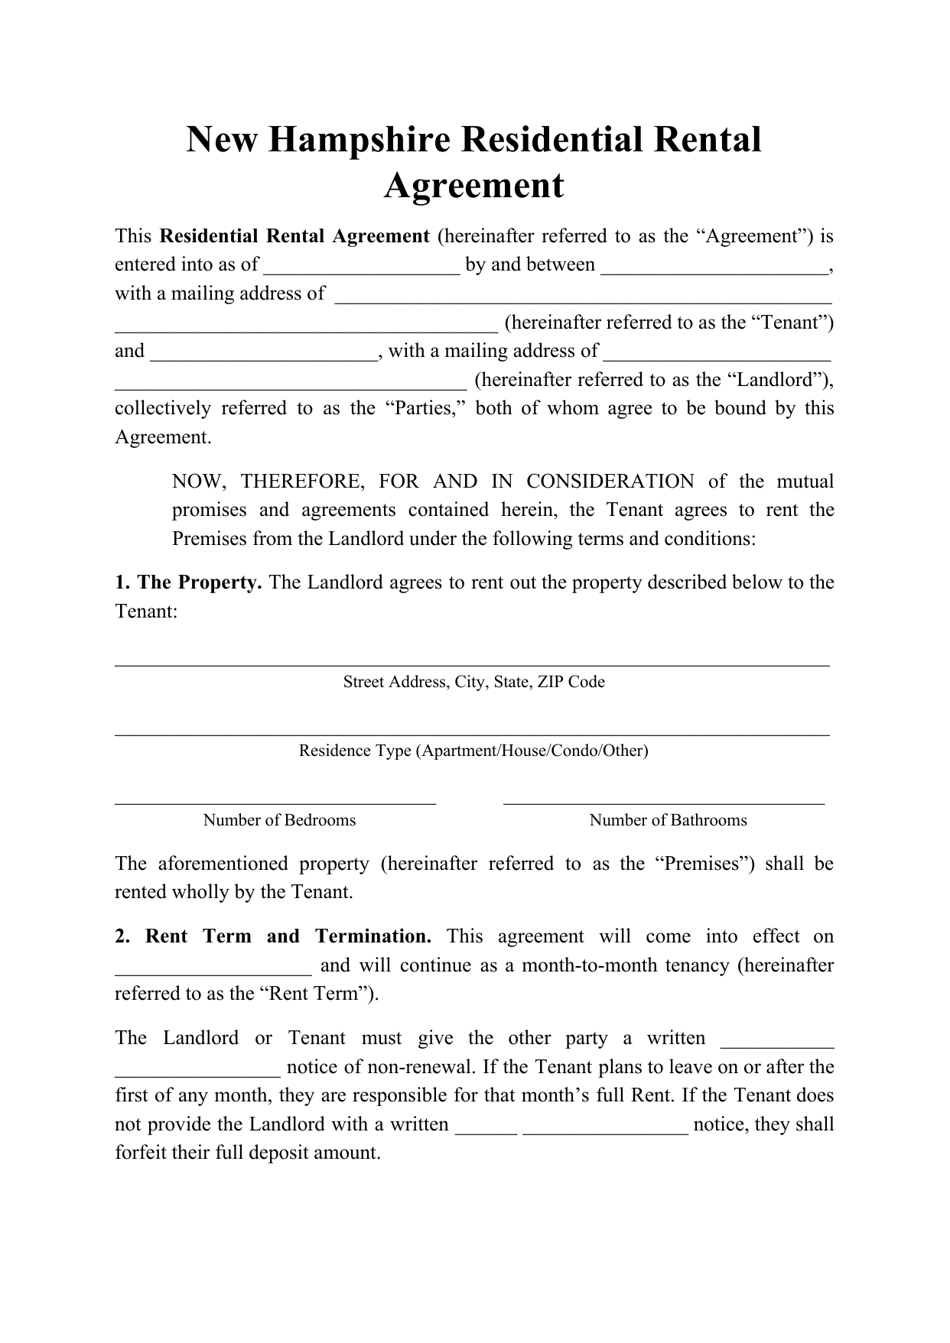 Residential Rental Agreement Template - New Hampshire, Page 1